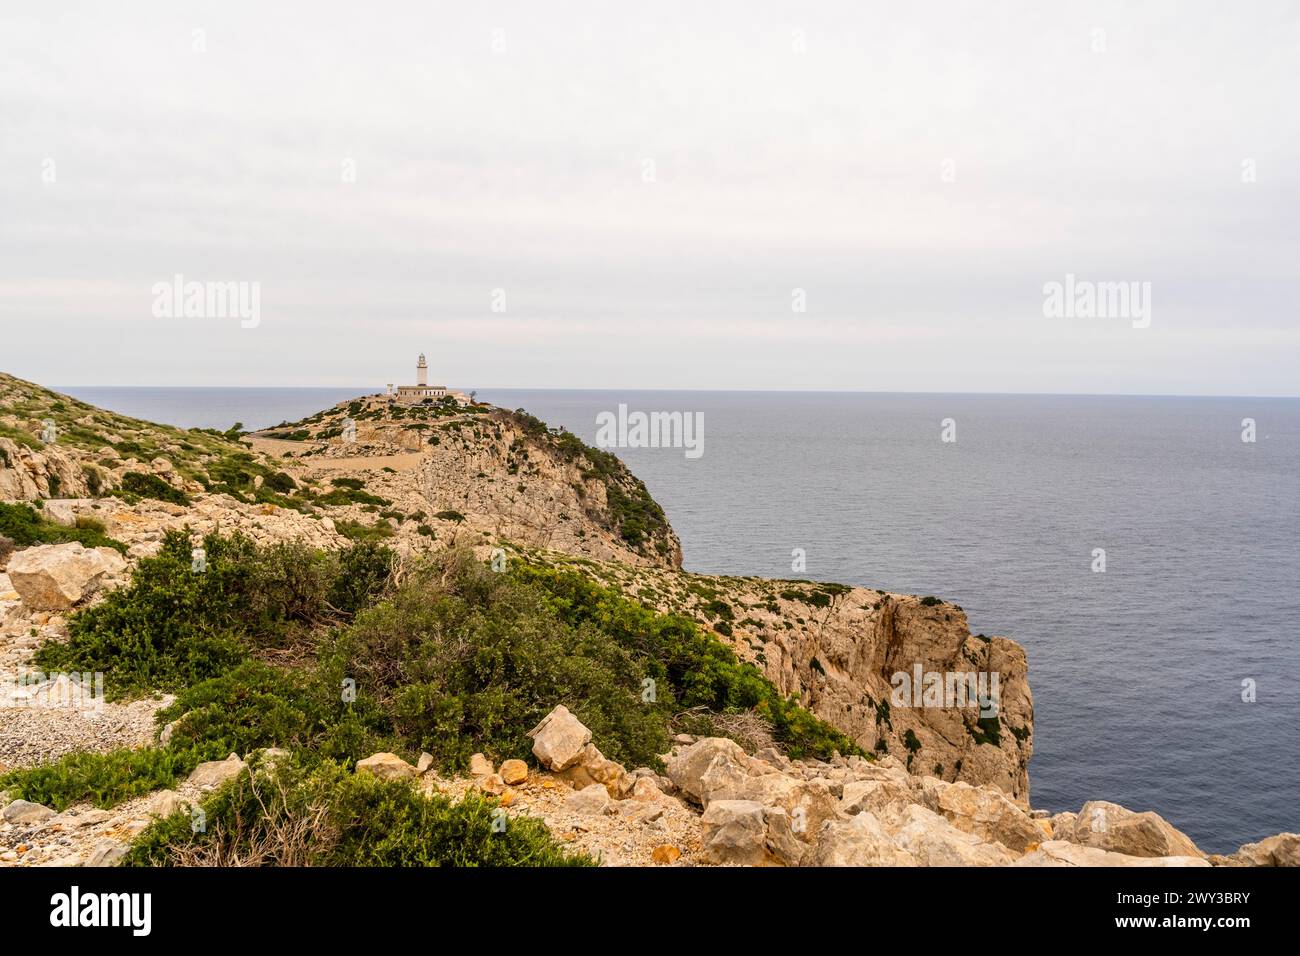 Amazing landscape of Formentor, Mallorca in Spain Stock Photo